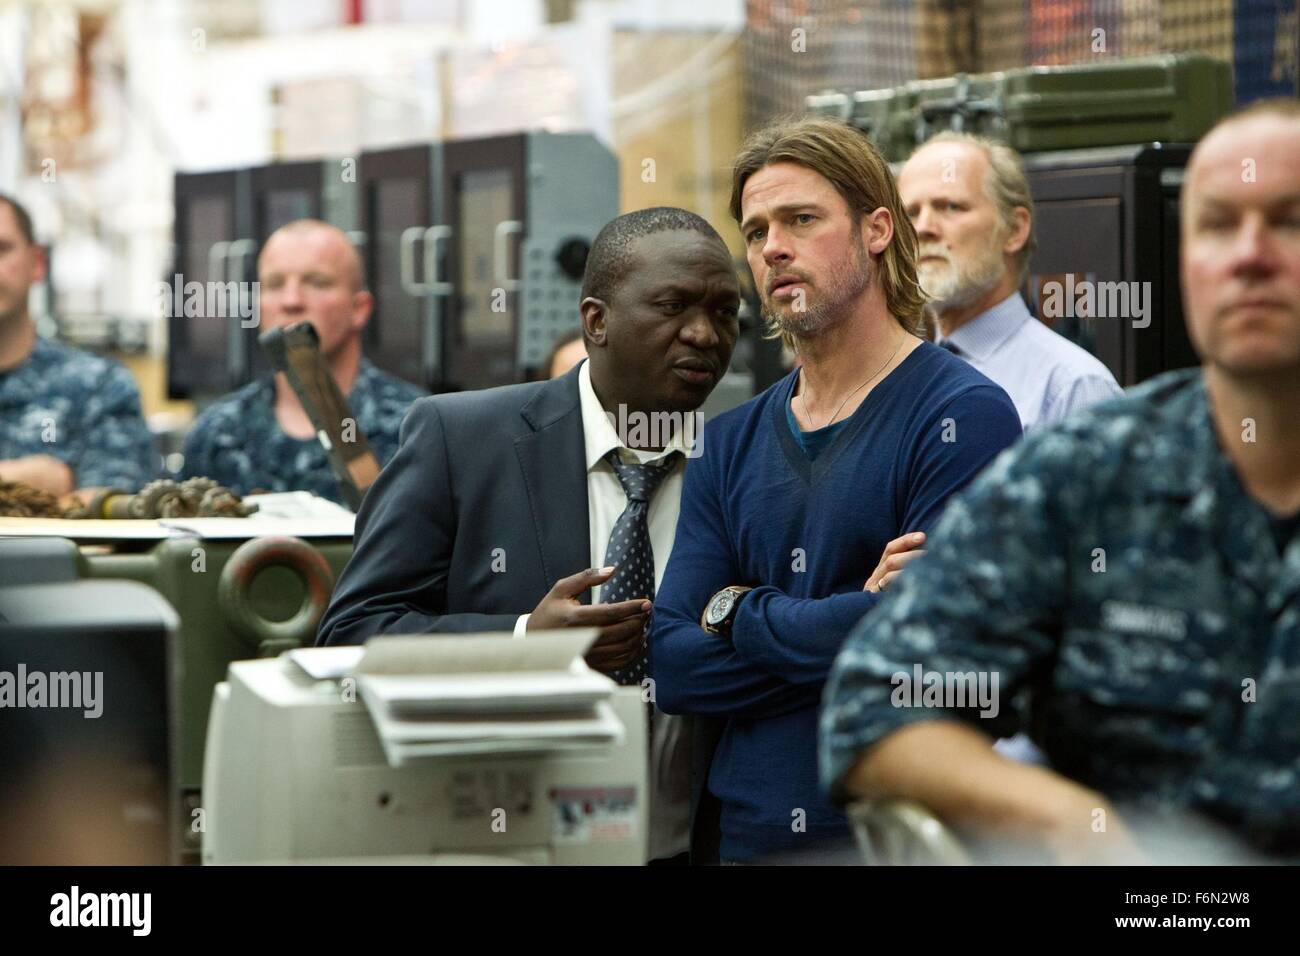 RELEASE DATE: June 21, 2013 TITLE: World War Z STUDIO: Paramount Pictures DIRECTOR: Marc Forster. PLOT: A U.N. employee is racing against time and fate, as he travels the world trying to stop the outbreak of a deadly Zombie pandemic PICTURED: BRAD PITT as Gerry Lane (Credit: c Plan B Entertainment/Entertainment Pictures) Stock Photo